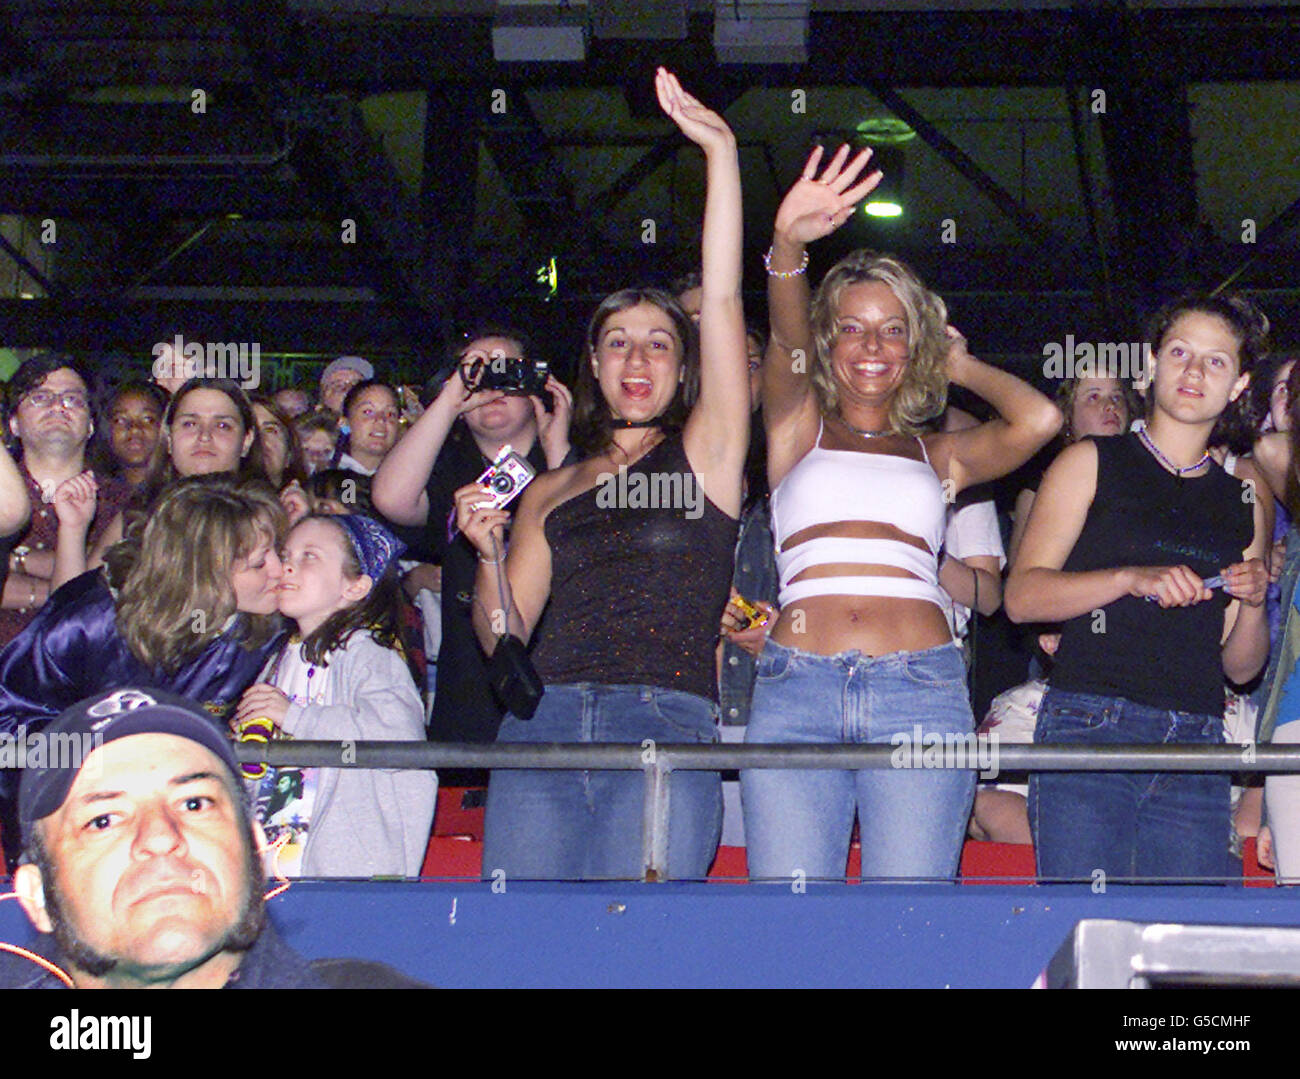 Fans react during the opening act of the NSync concert at Giants Stadium in East Rutherford, New Jersey, June 3, 2001. Stock Photo